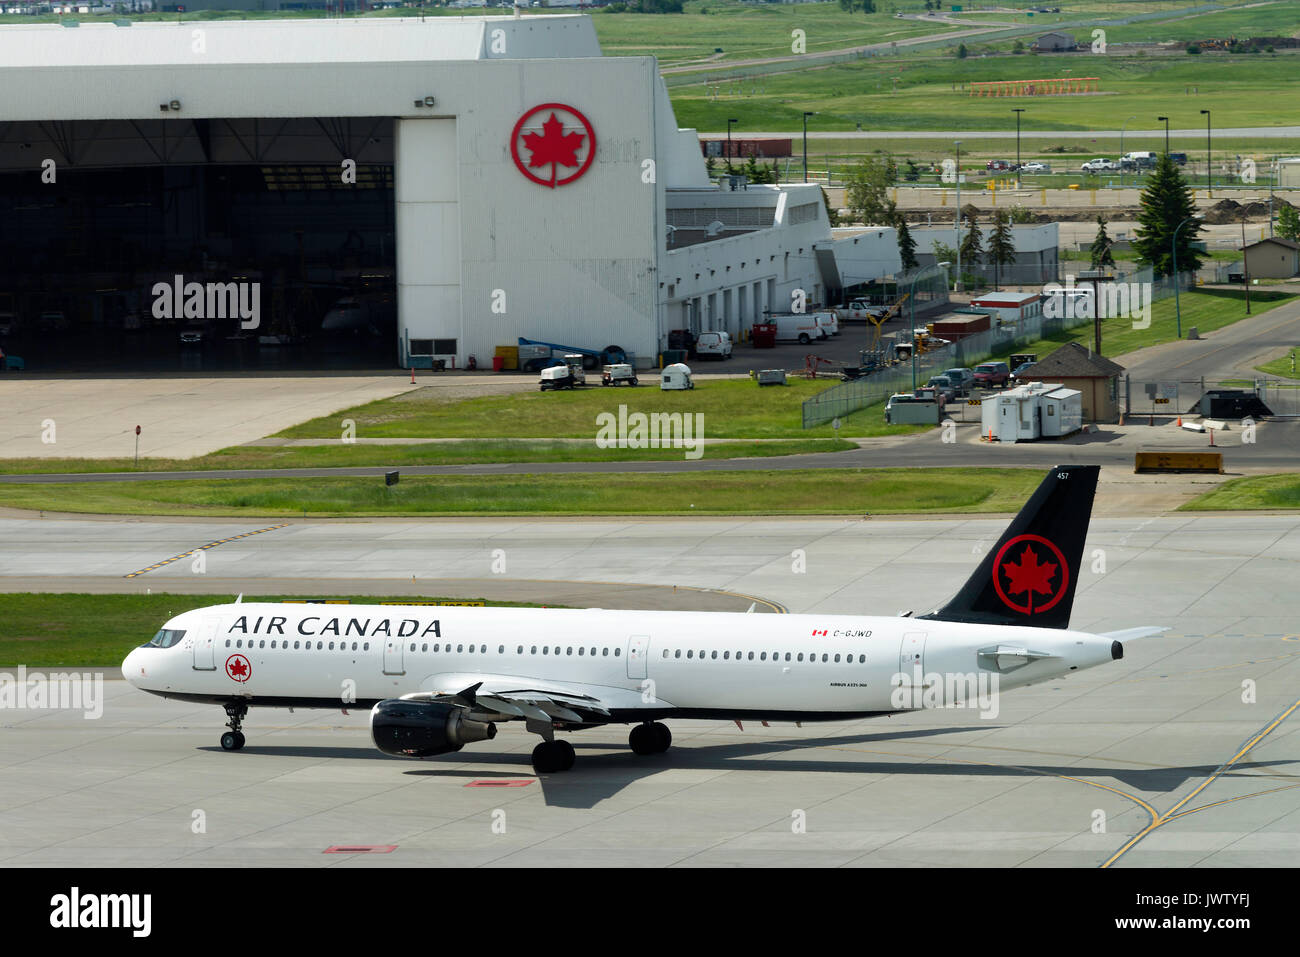 Air Canada Airline Airbus A321-211 Airliner C-GJWD Taxxiing on Arrival at Calgary International Airport Alberta Canada Stock Photo